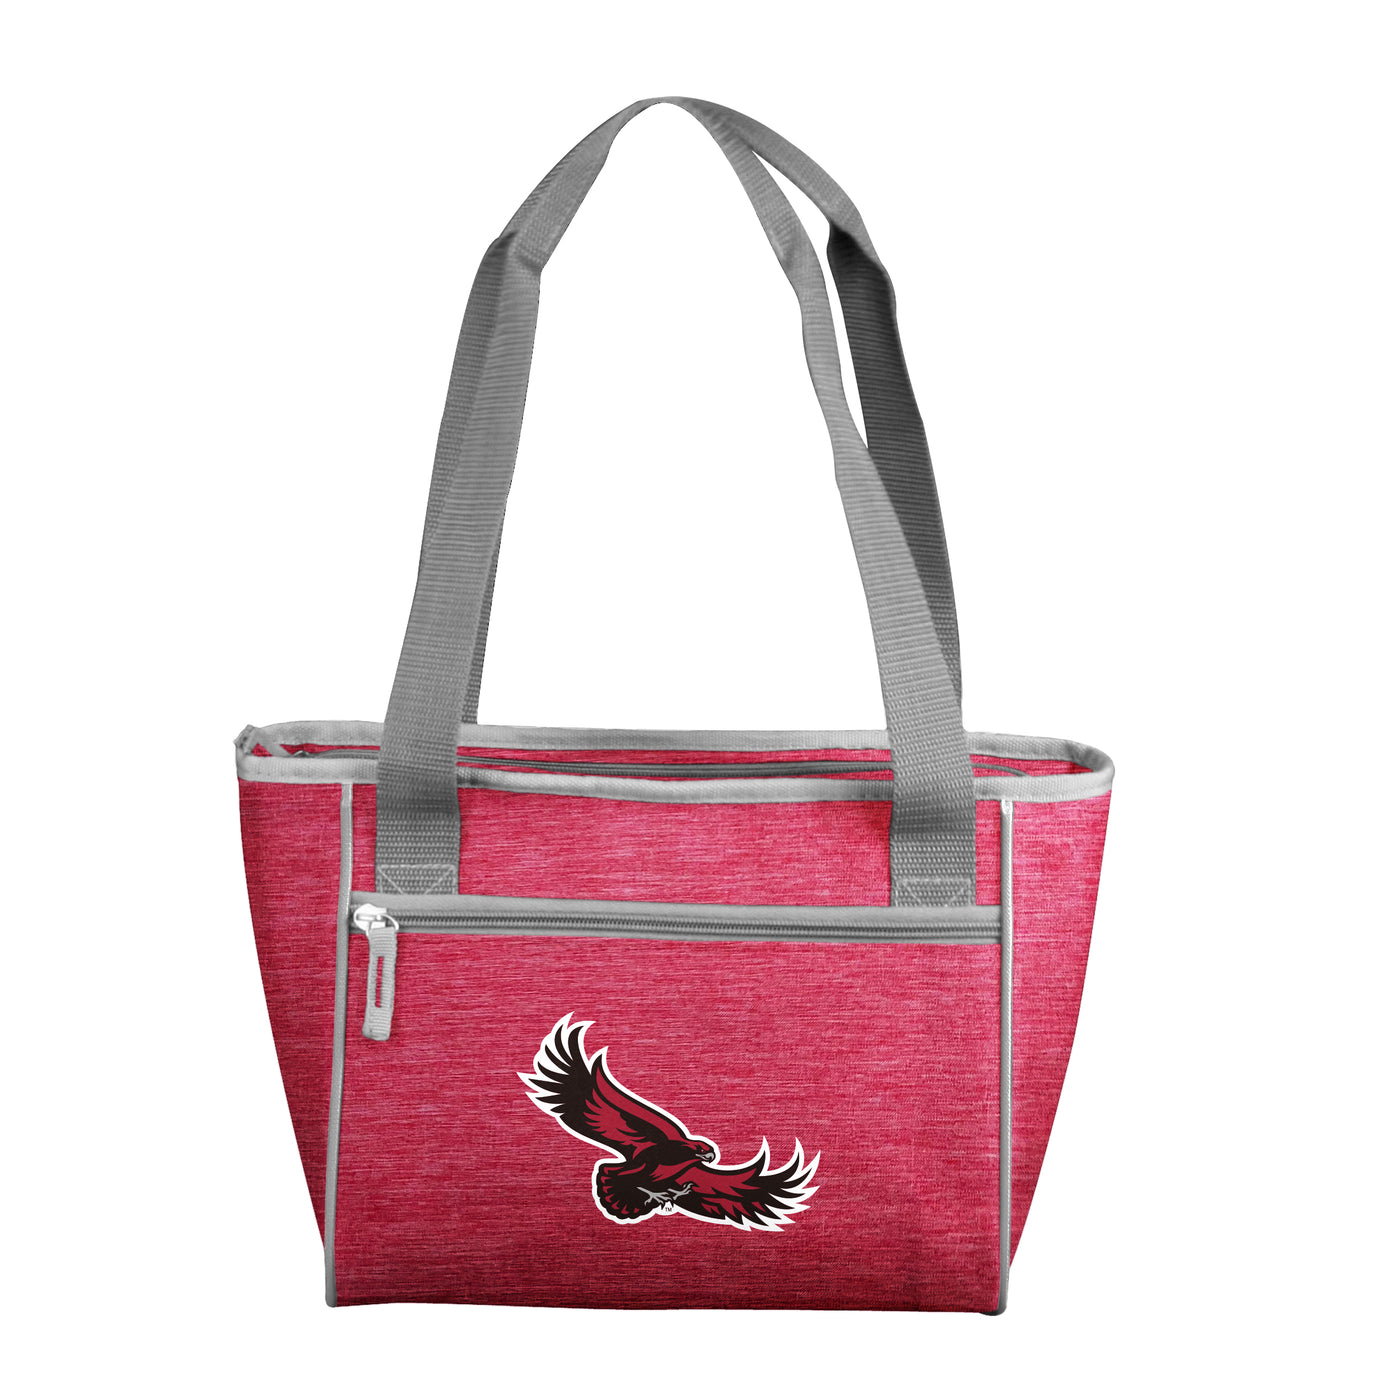 St. Joseph's 16 Can Cooler Tote